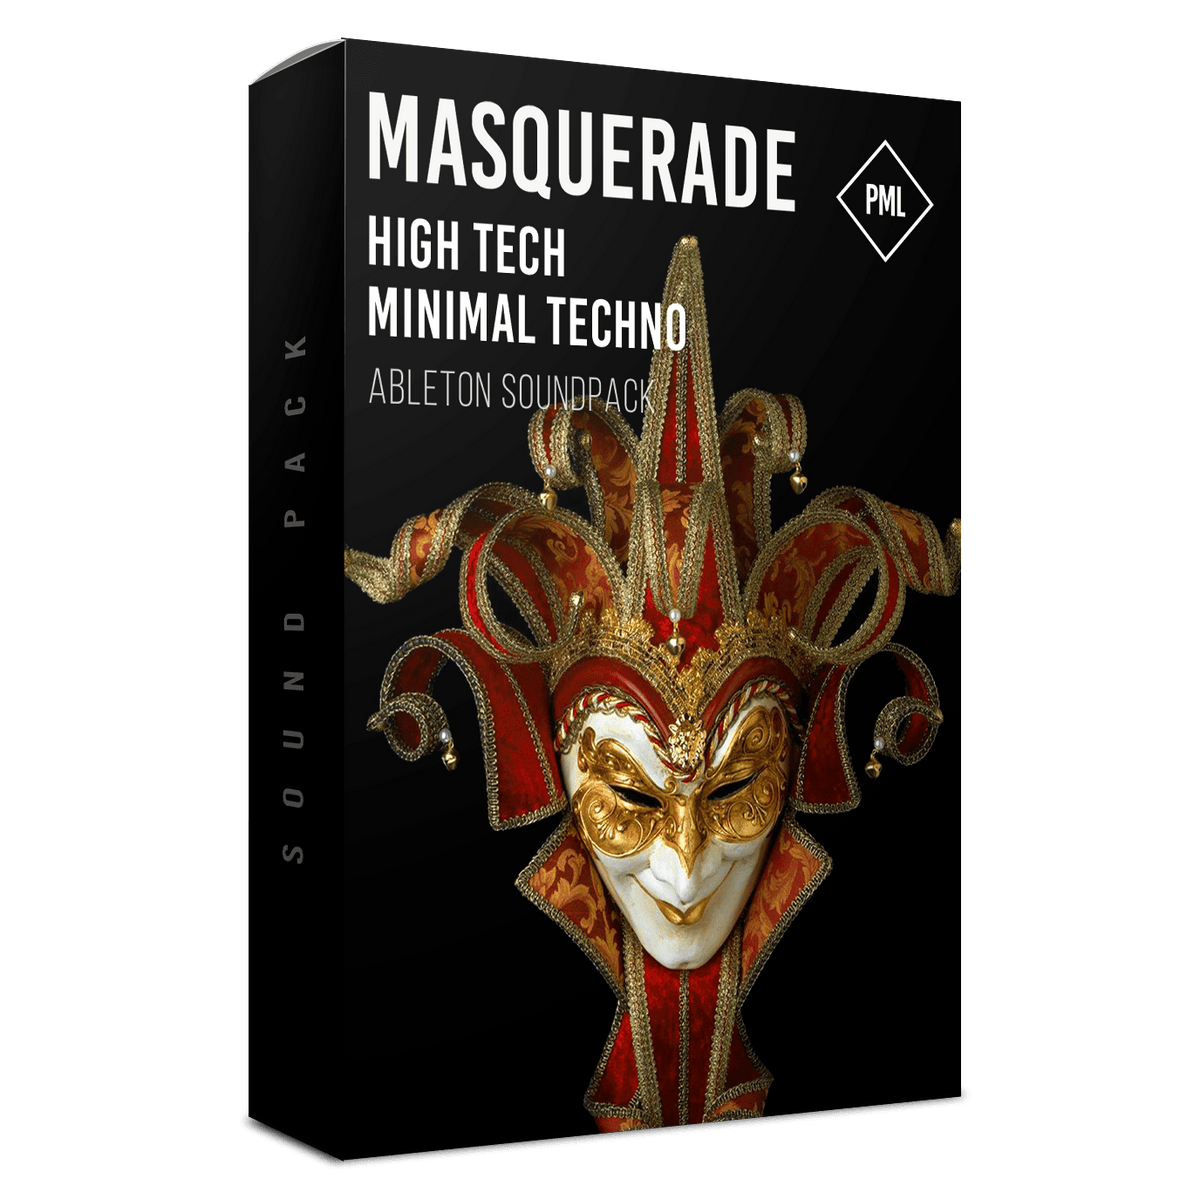 Masquerade Pack - High Tech Minimal Techno Sound Pack Product Box